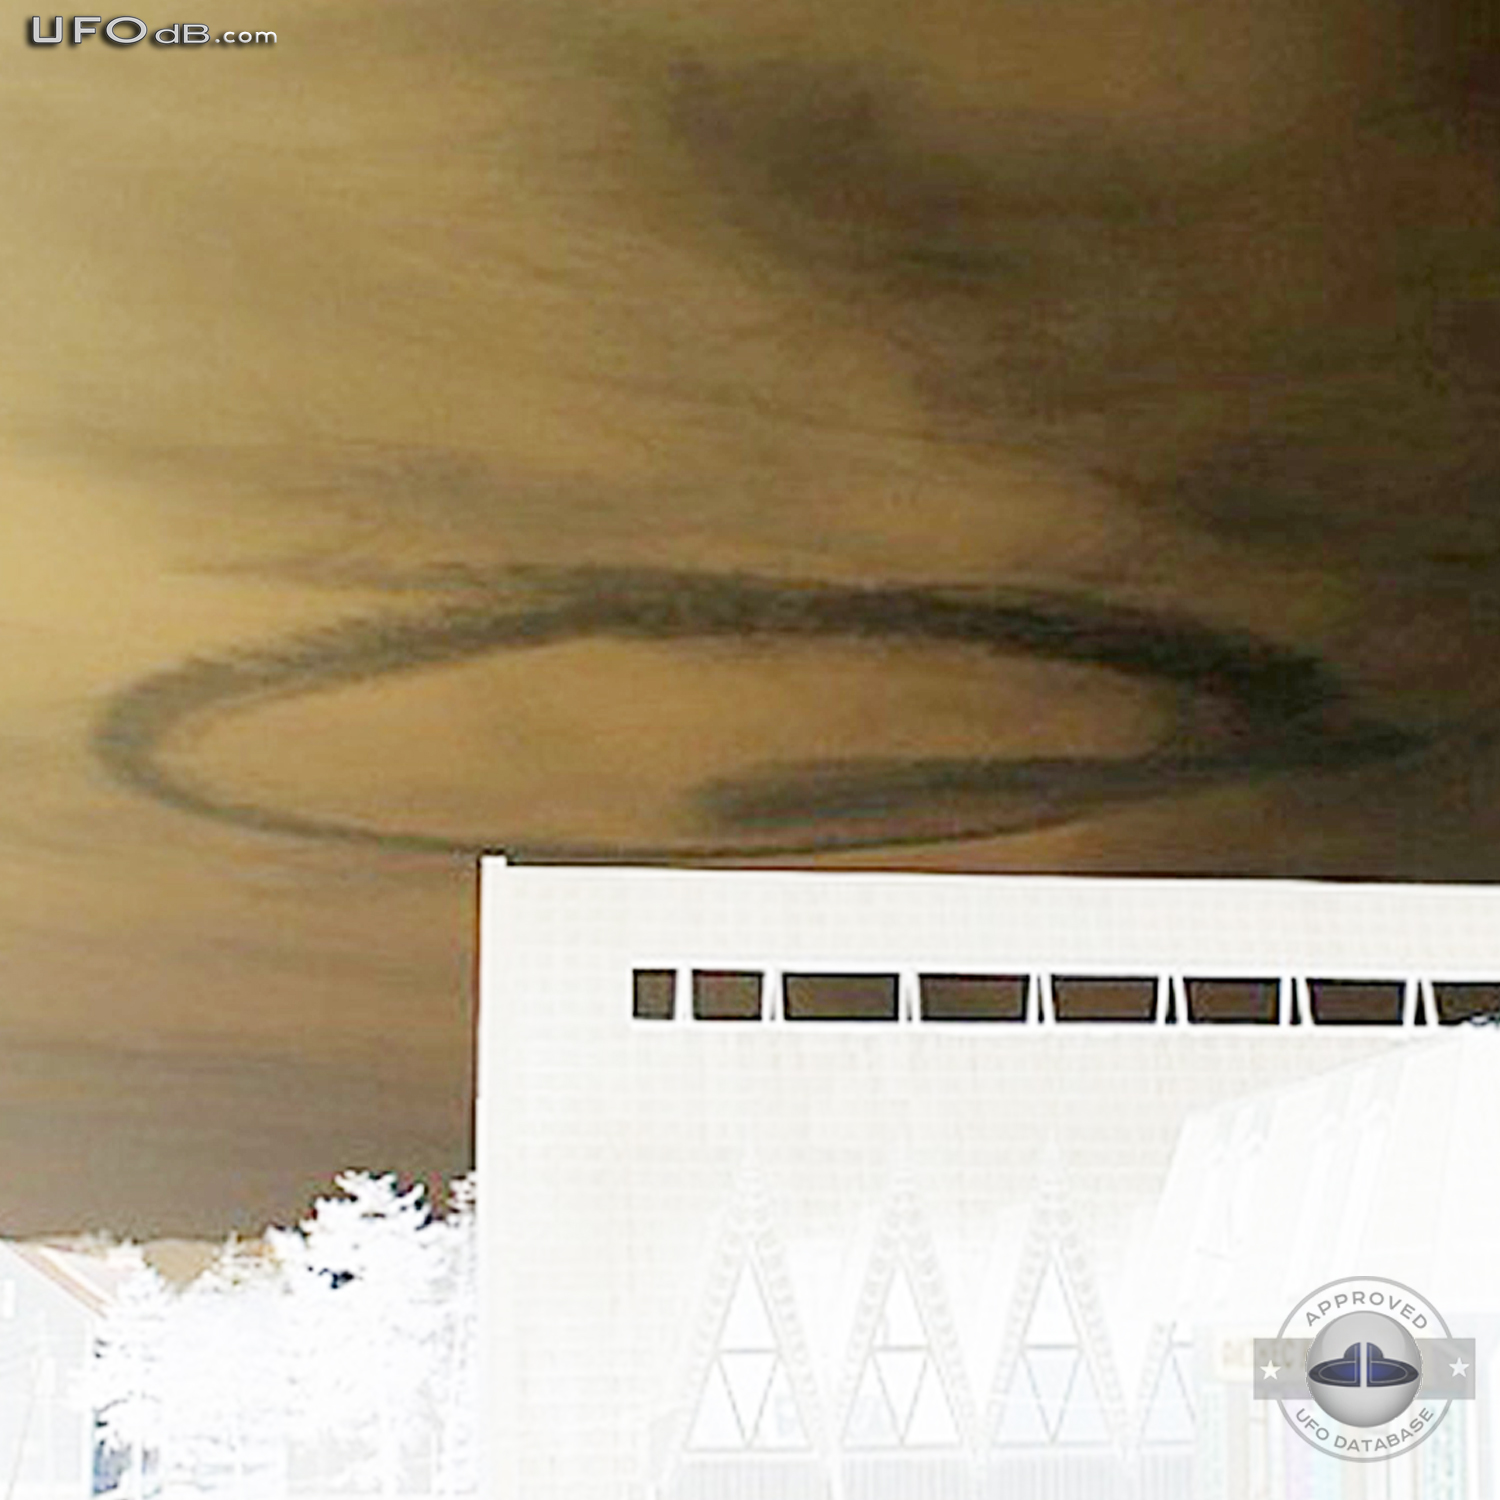 Ring Cloud UFO Float over the village of Abinsk Russia | March 14 2011 UFO Picture #339-4